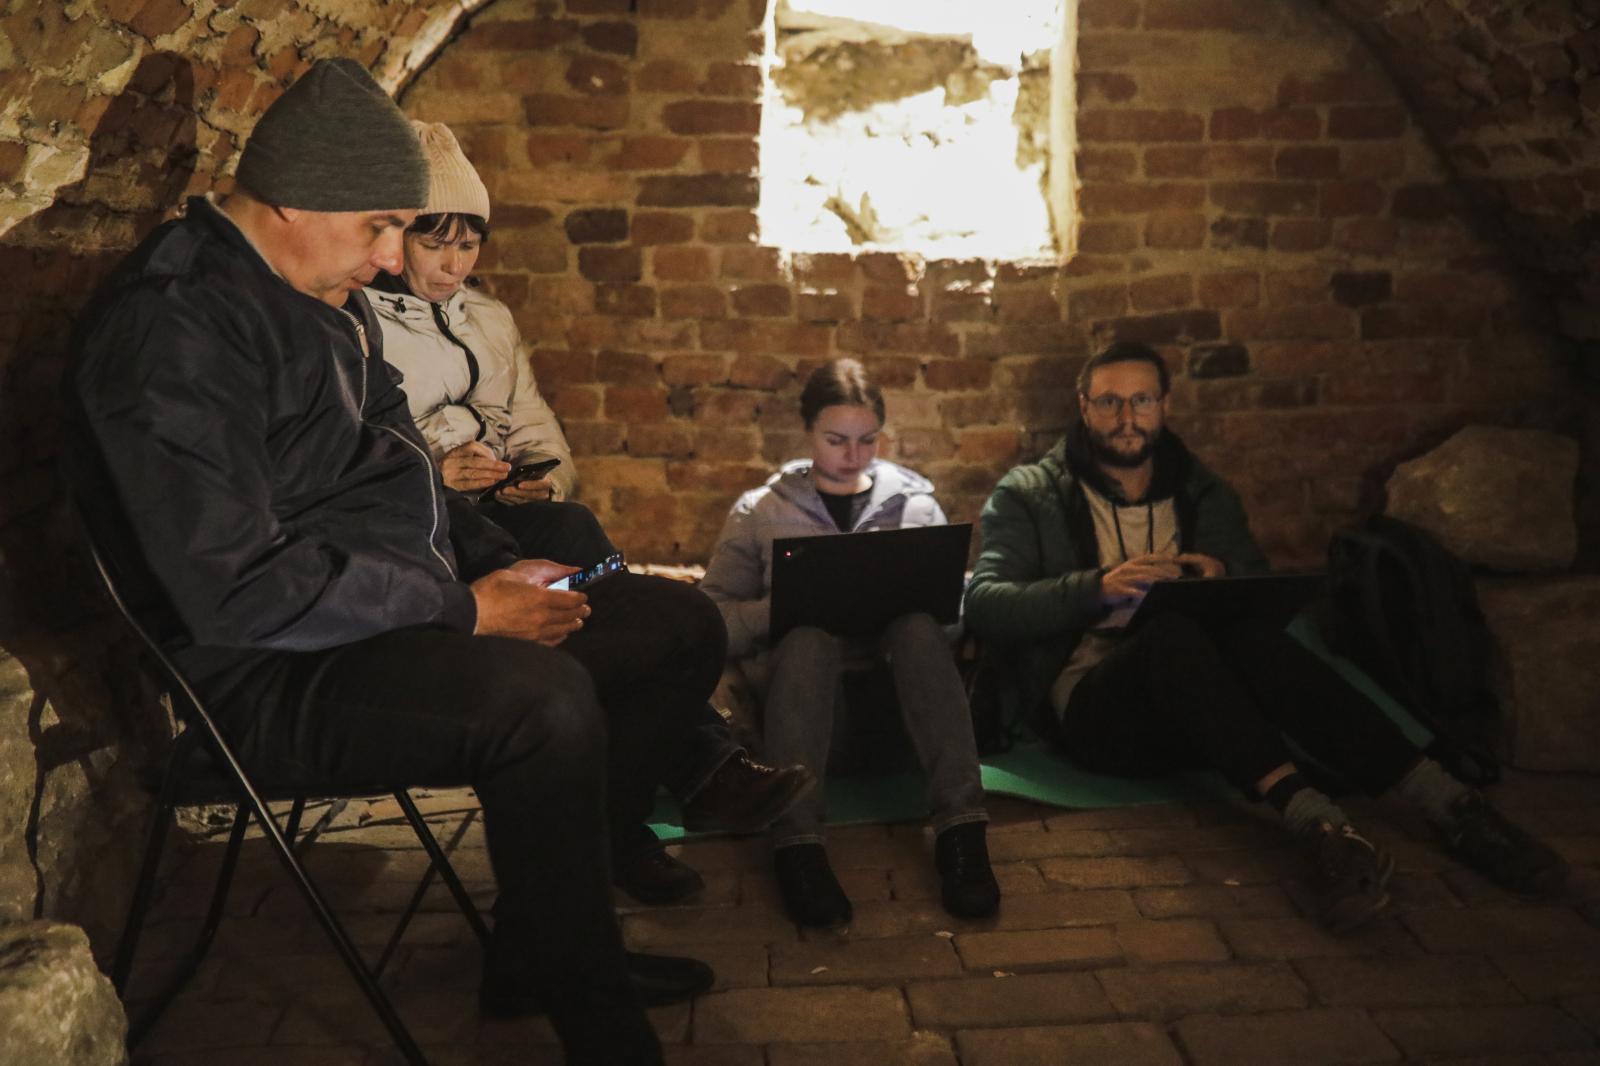 Anadolu/Getty Musicians play music in Lviv to comfort people displaced from war zones - Abril 20, 2022. Musicians play music to try to confort...